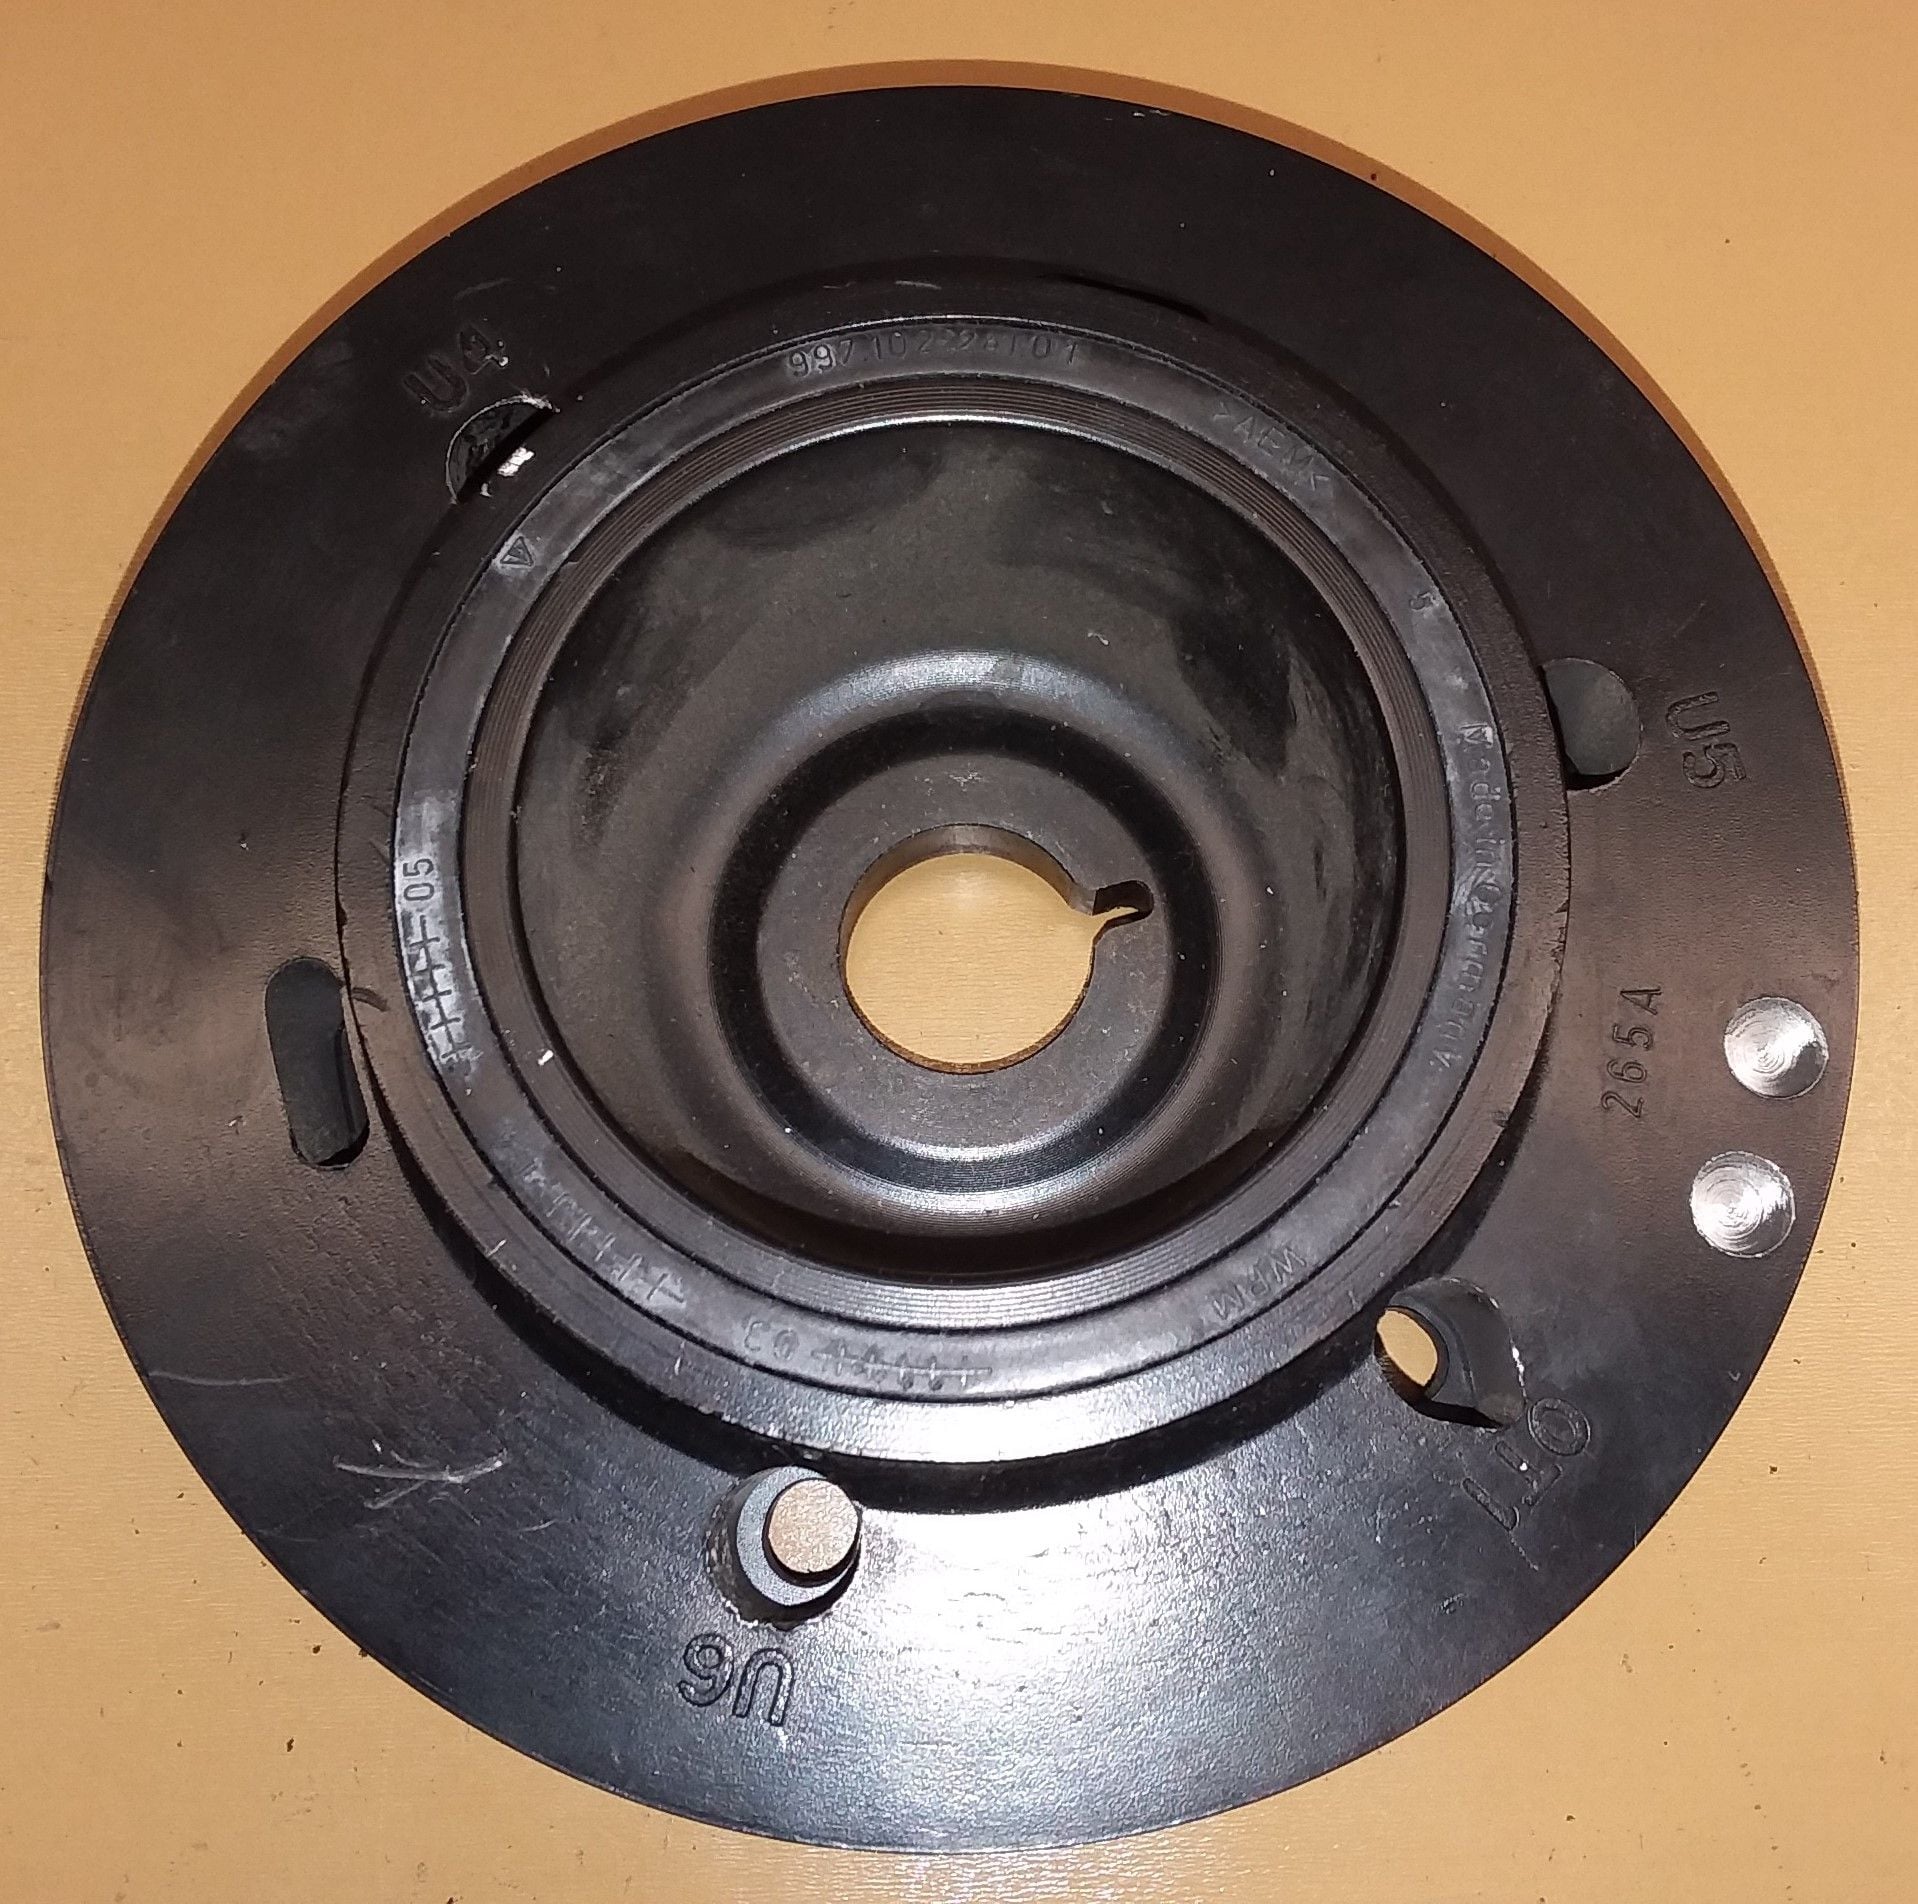 Miscellaneous - Engine Vibration Damper Pulley 99710224101 - Used - Colorado Springs, CO 80906, United States